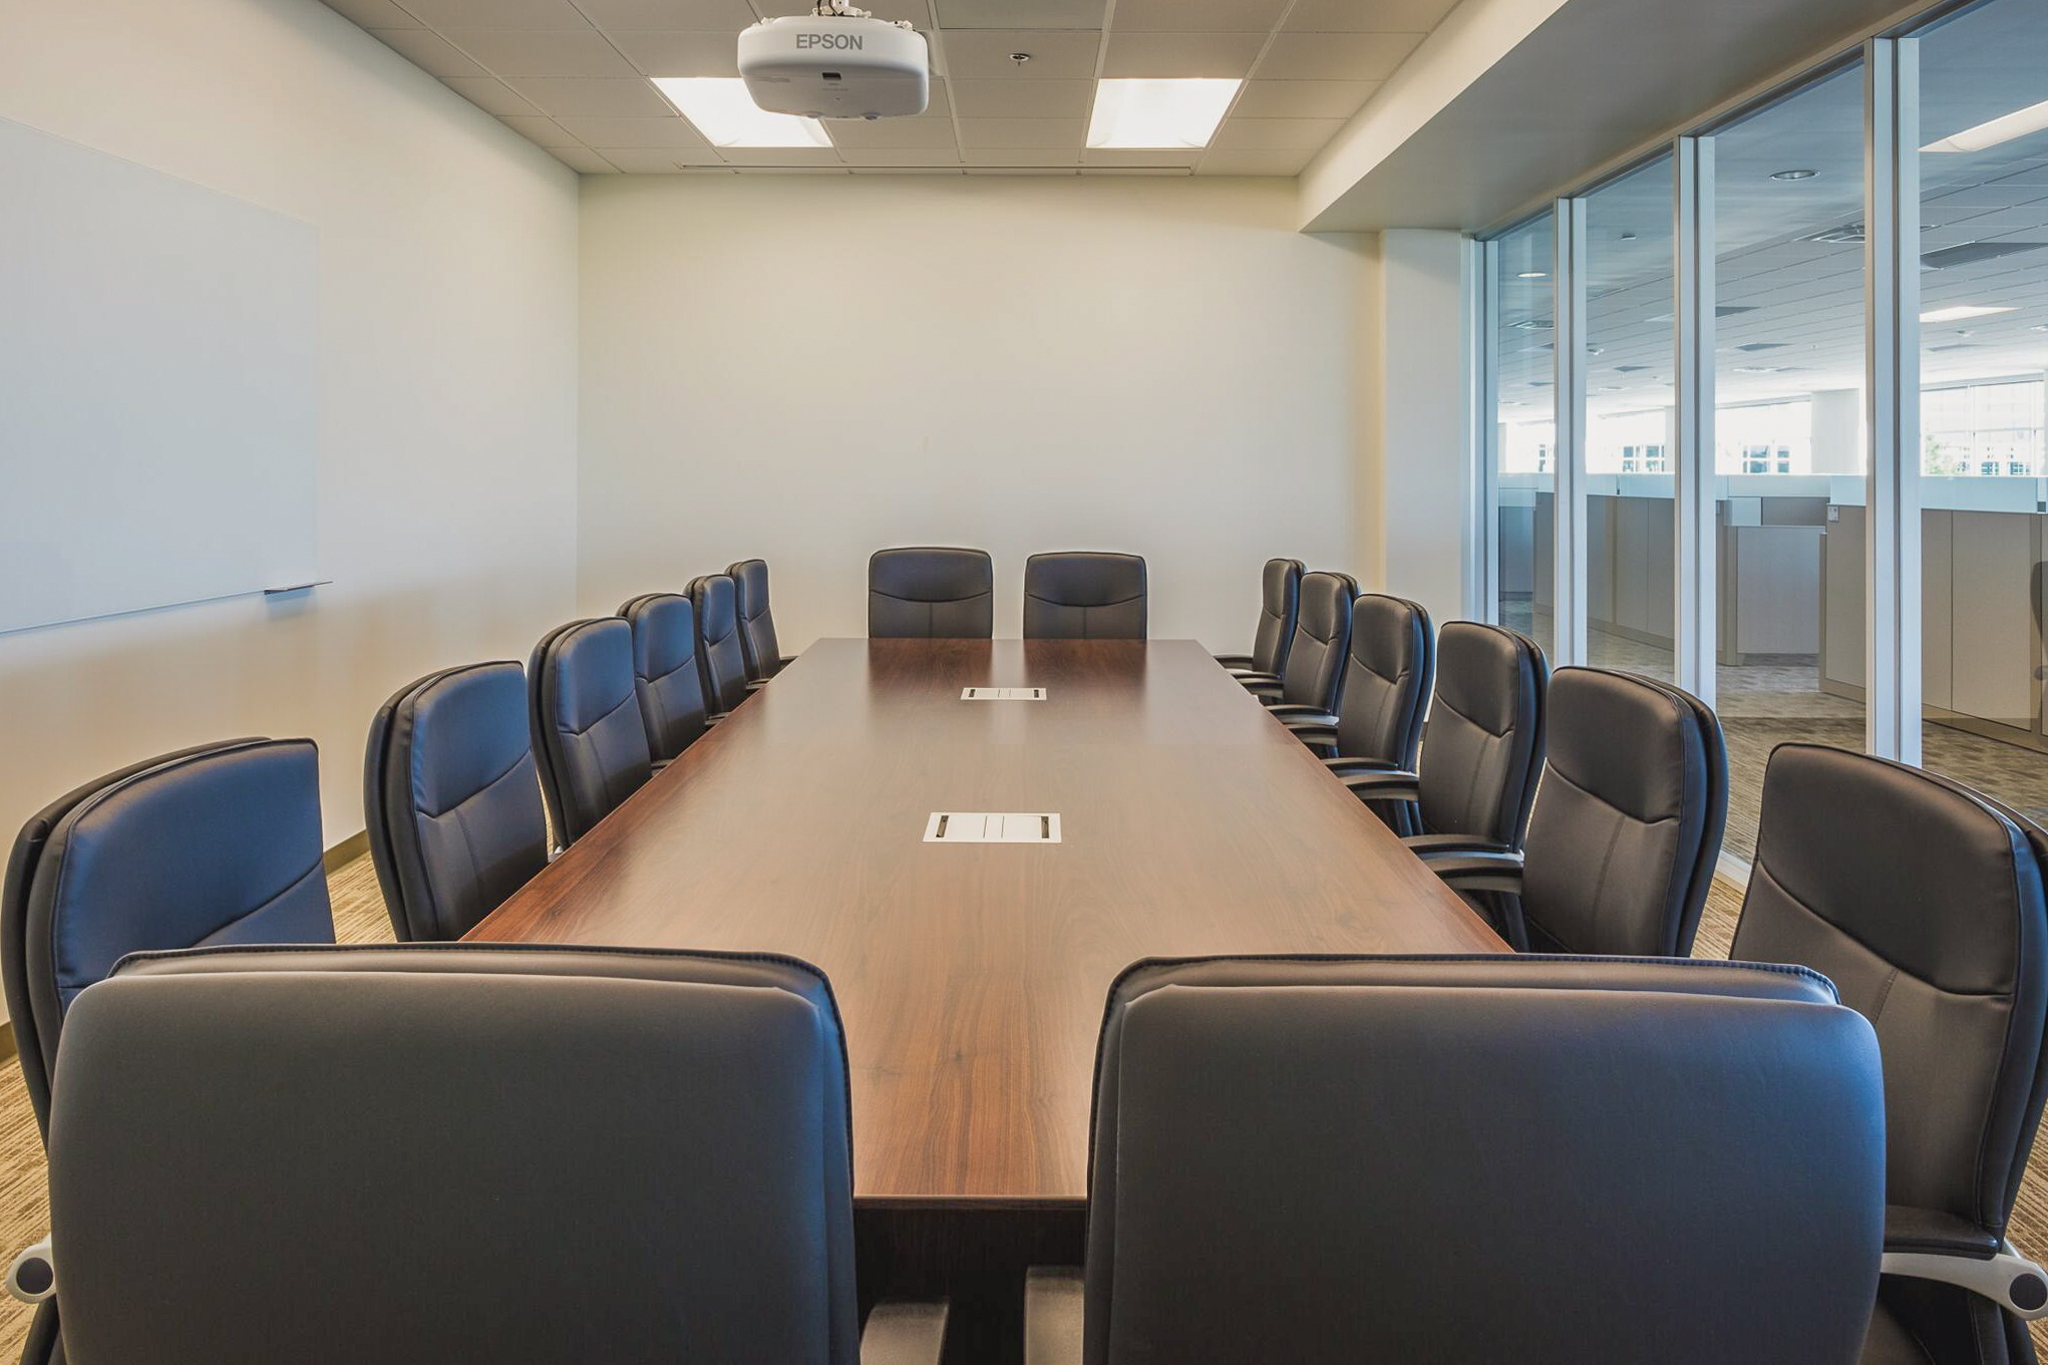 Tyler Technologies Conference Room